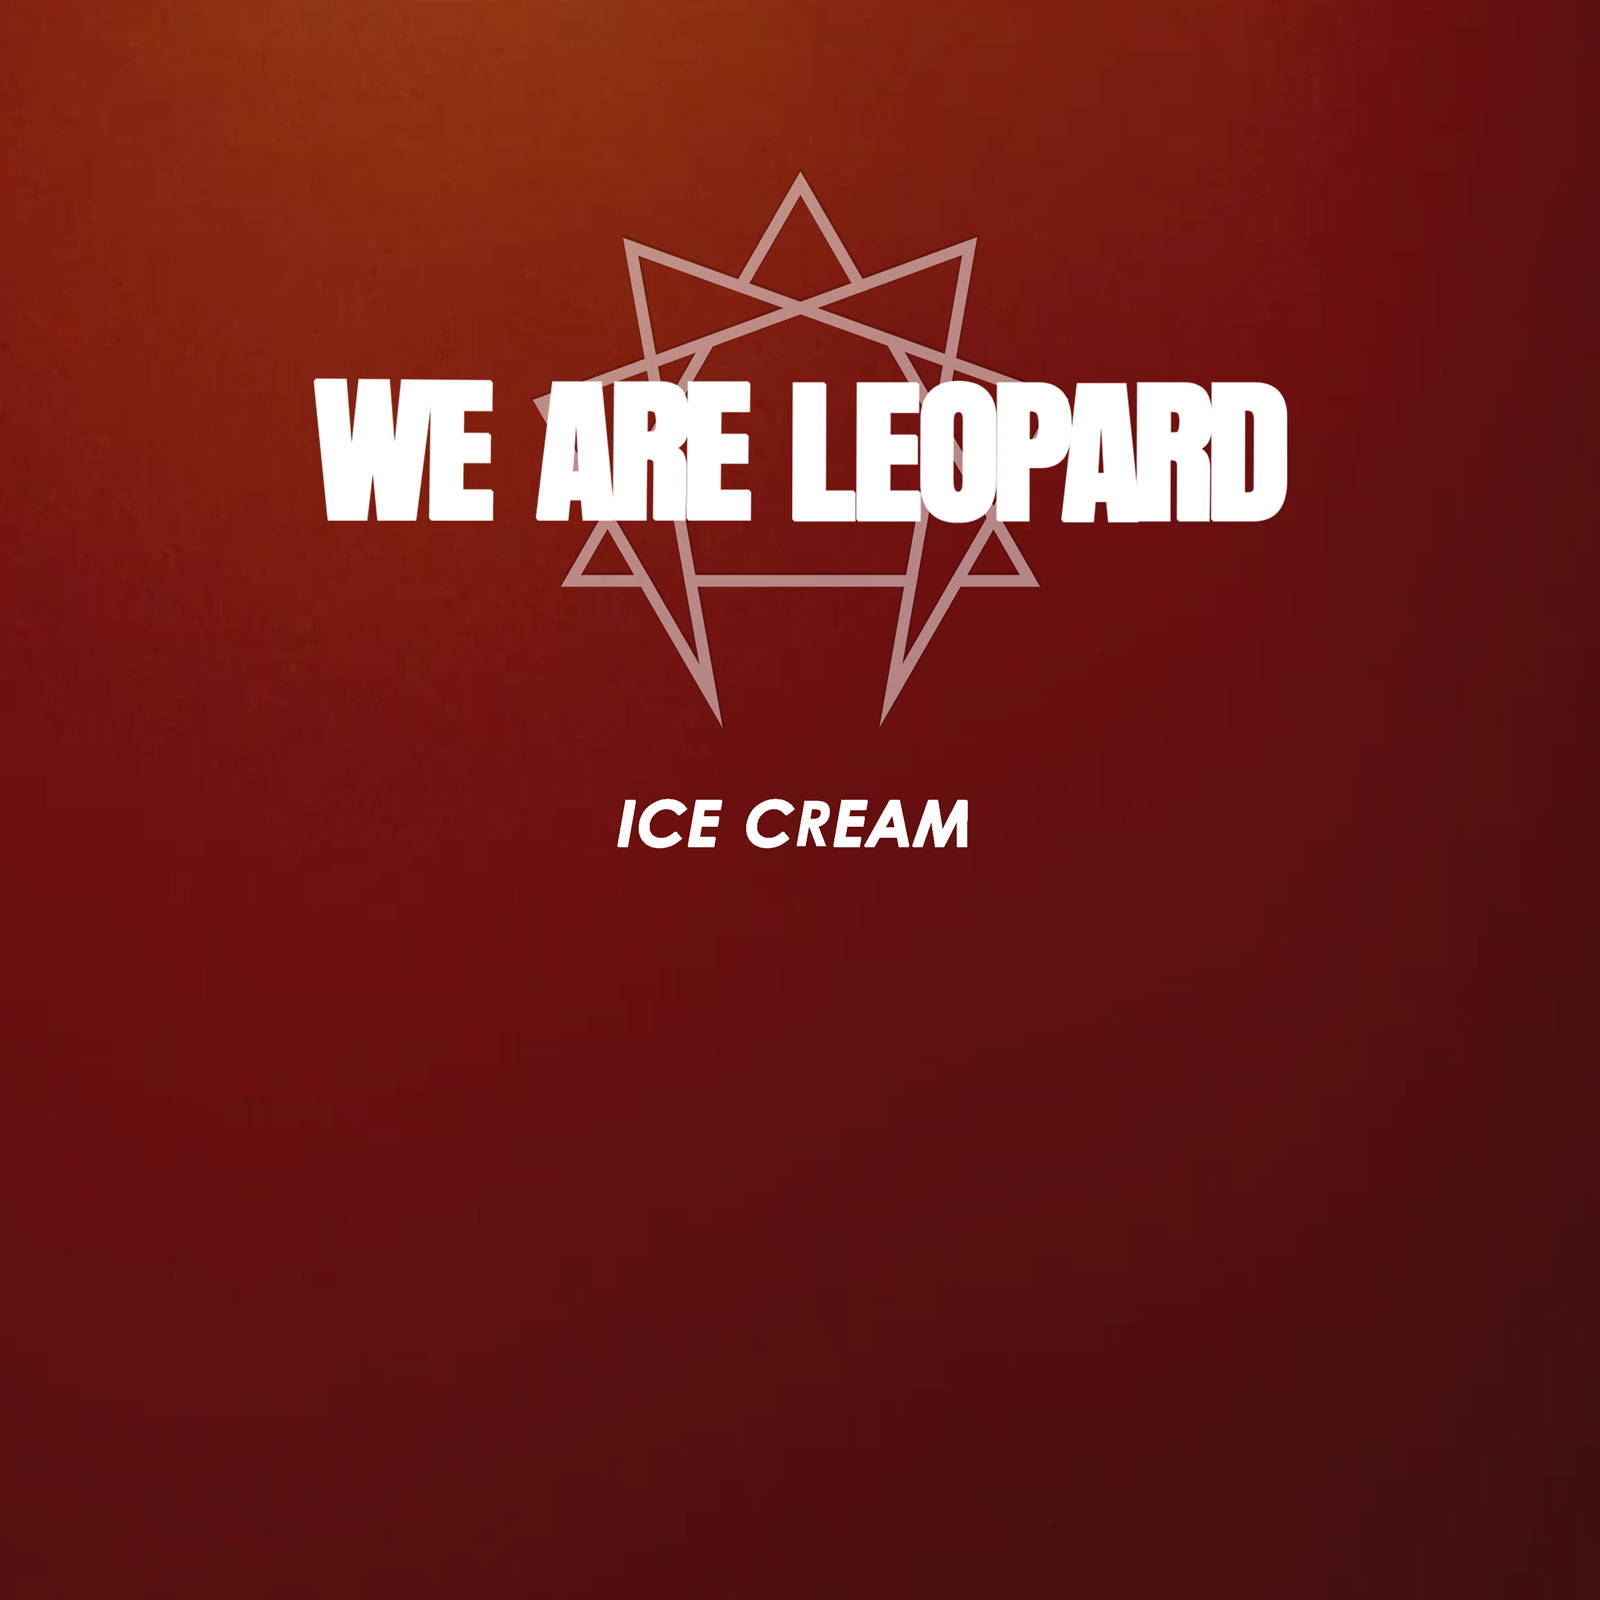 Ice Cream by We are LEOPARD - Vapor Twitch